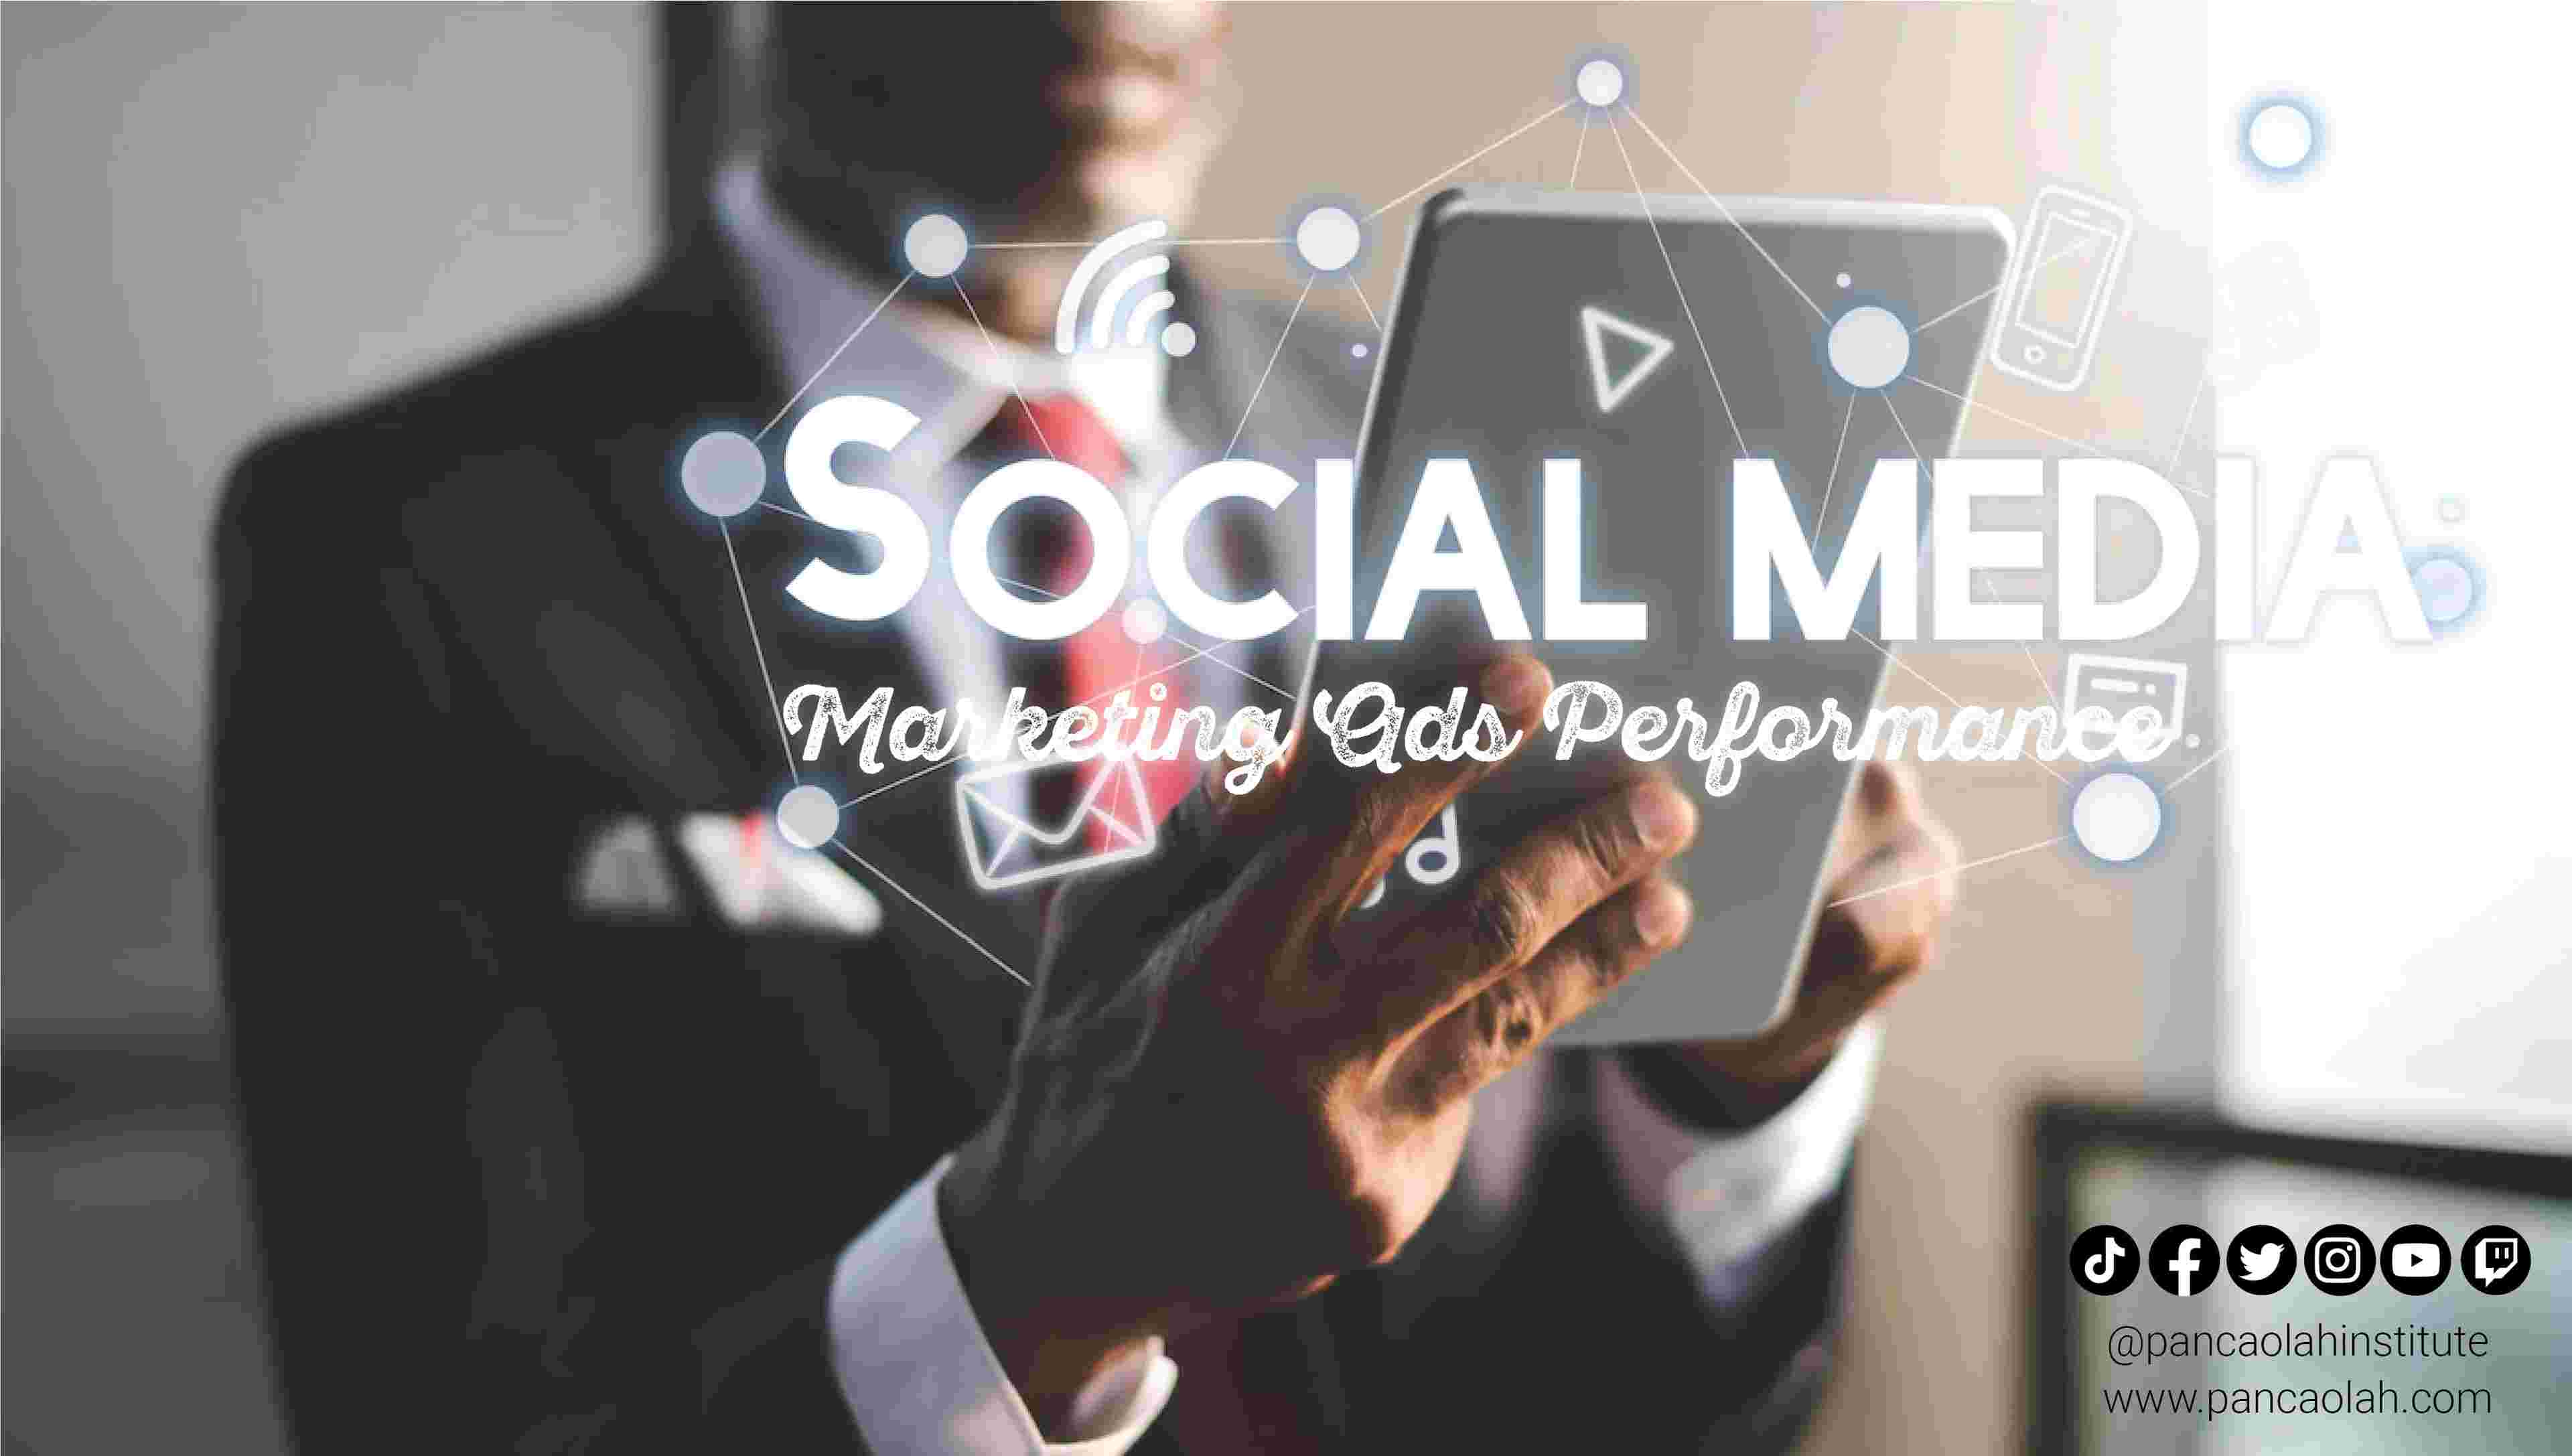 The Social Media and Marketing Ads Performance